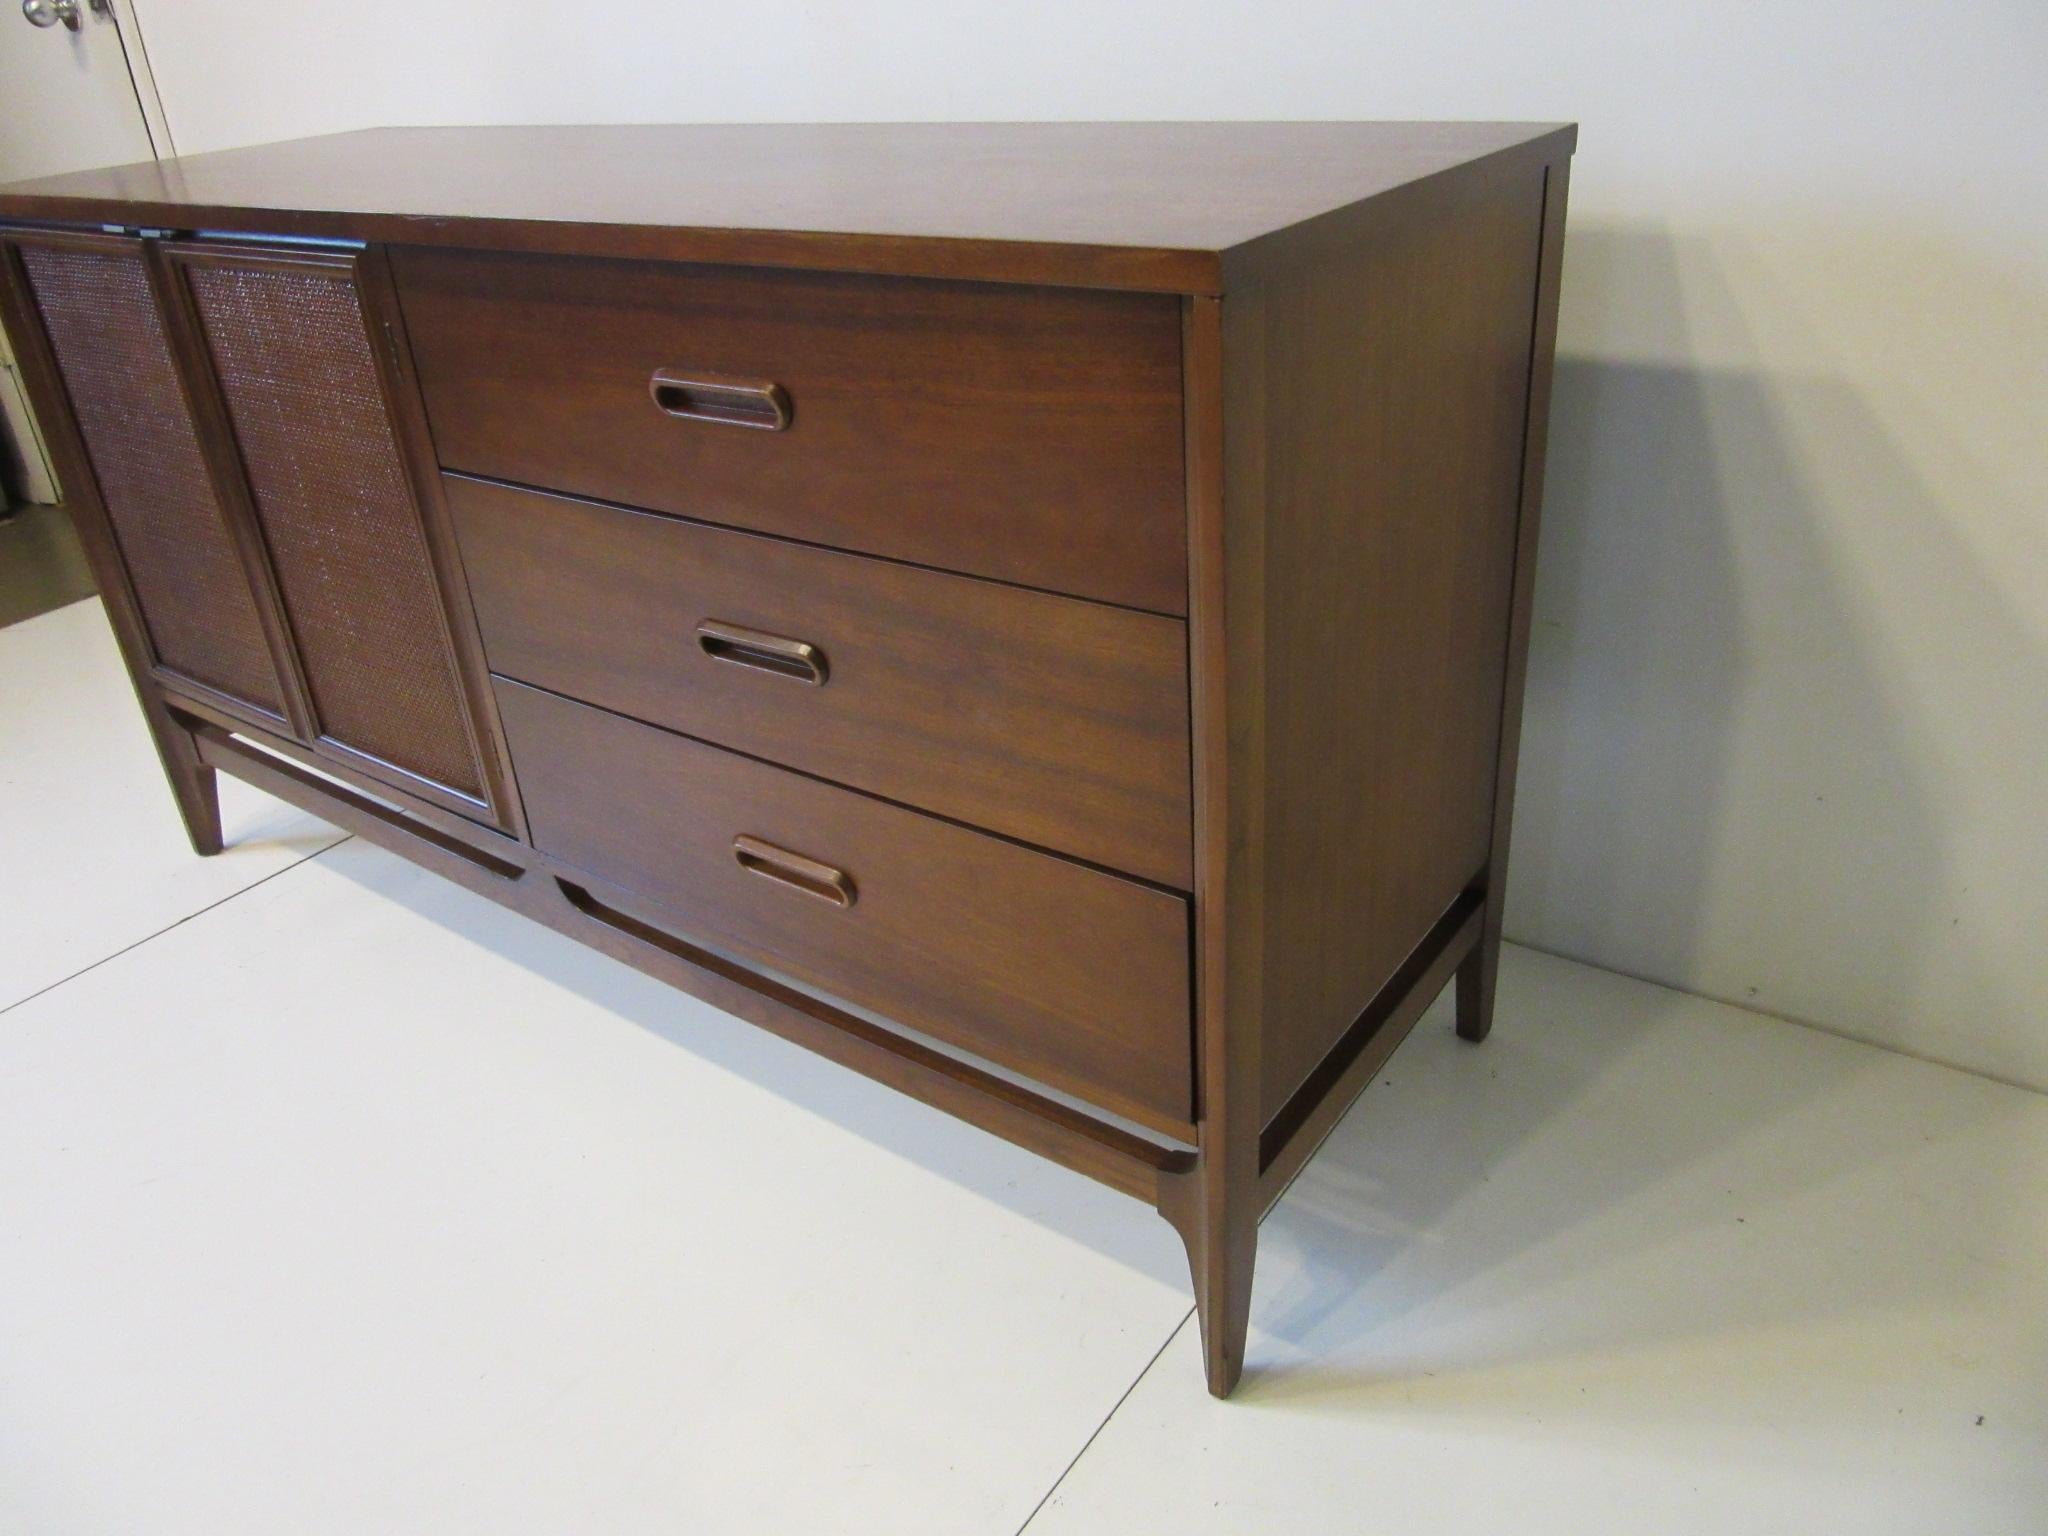 A smaller sized walnut credenza / server with three drawers having built in pulls and two doors and one shelve with storage. The double door fronts are woven with bronze toned upper pulls and wonderfully grained top.